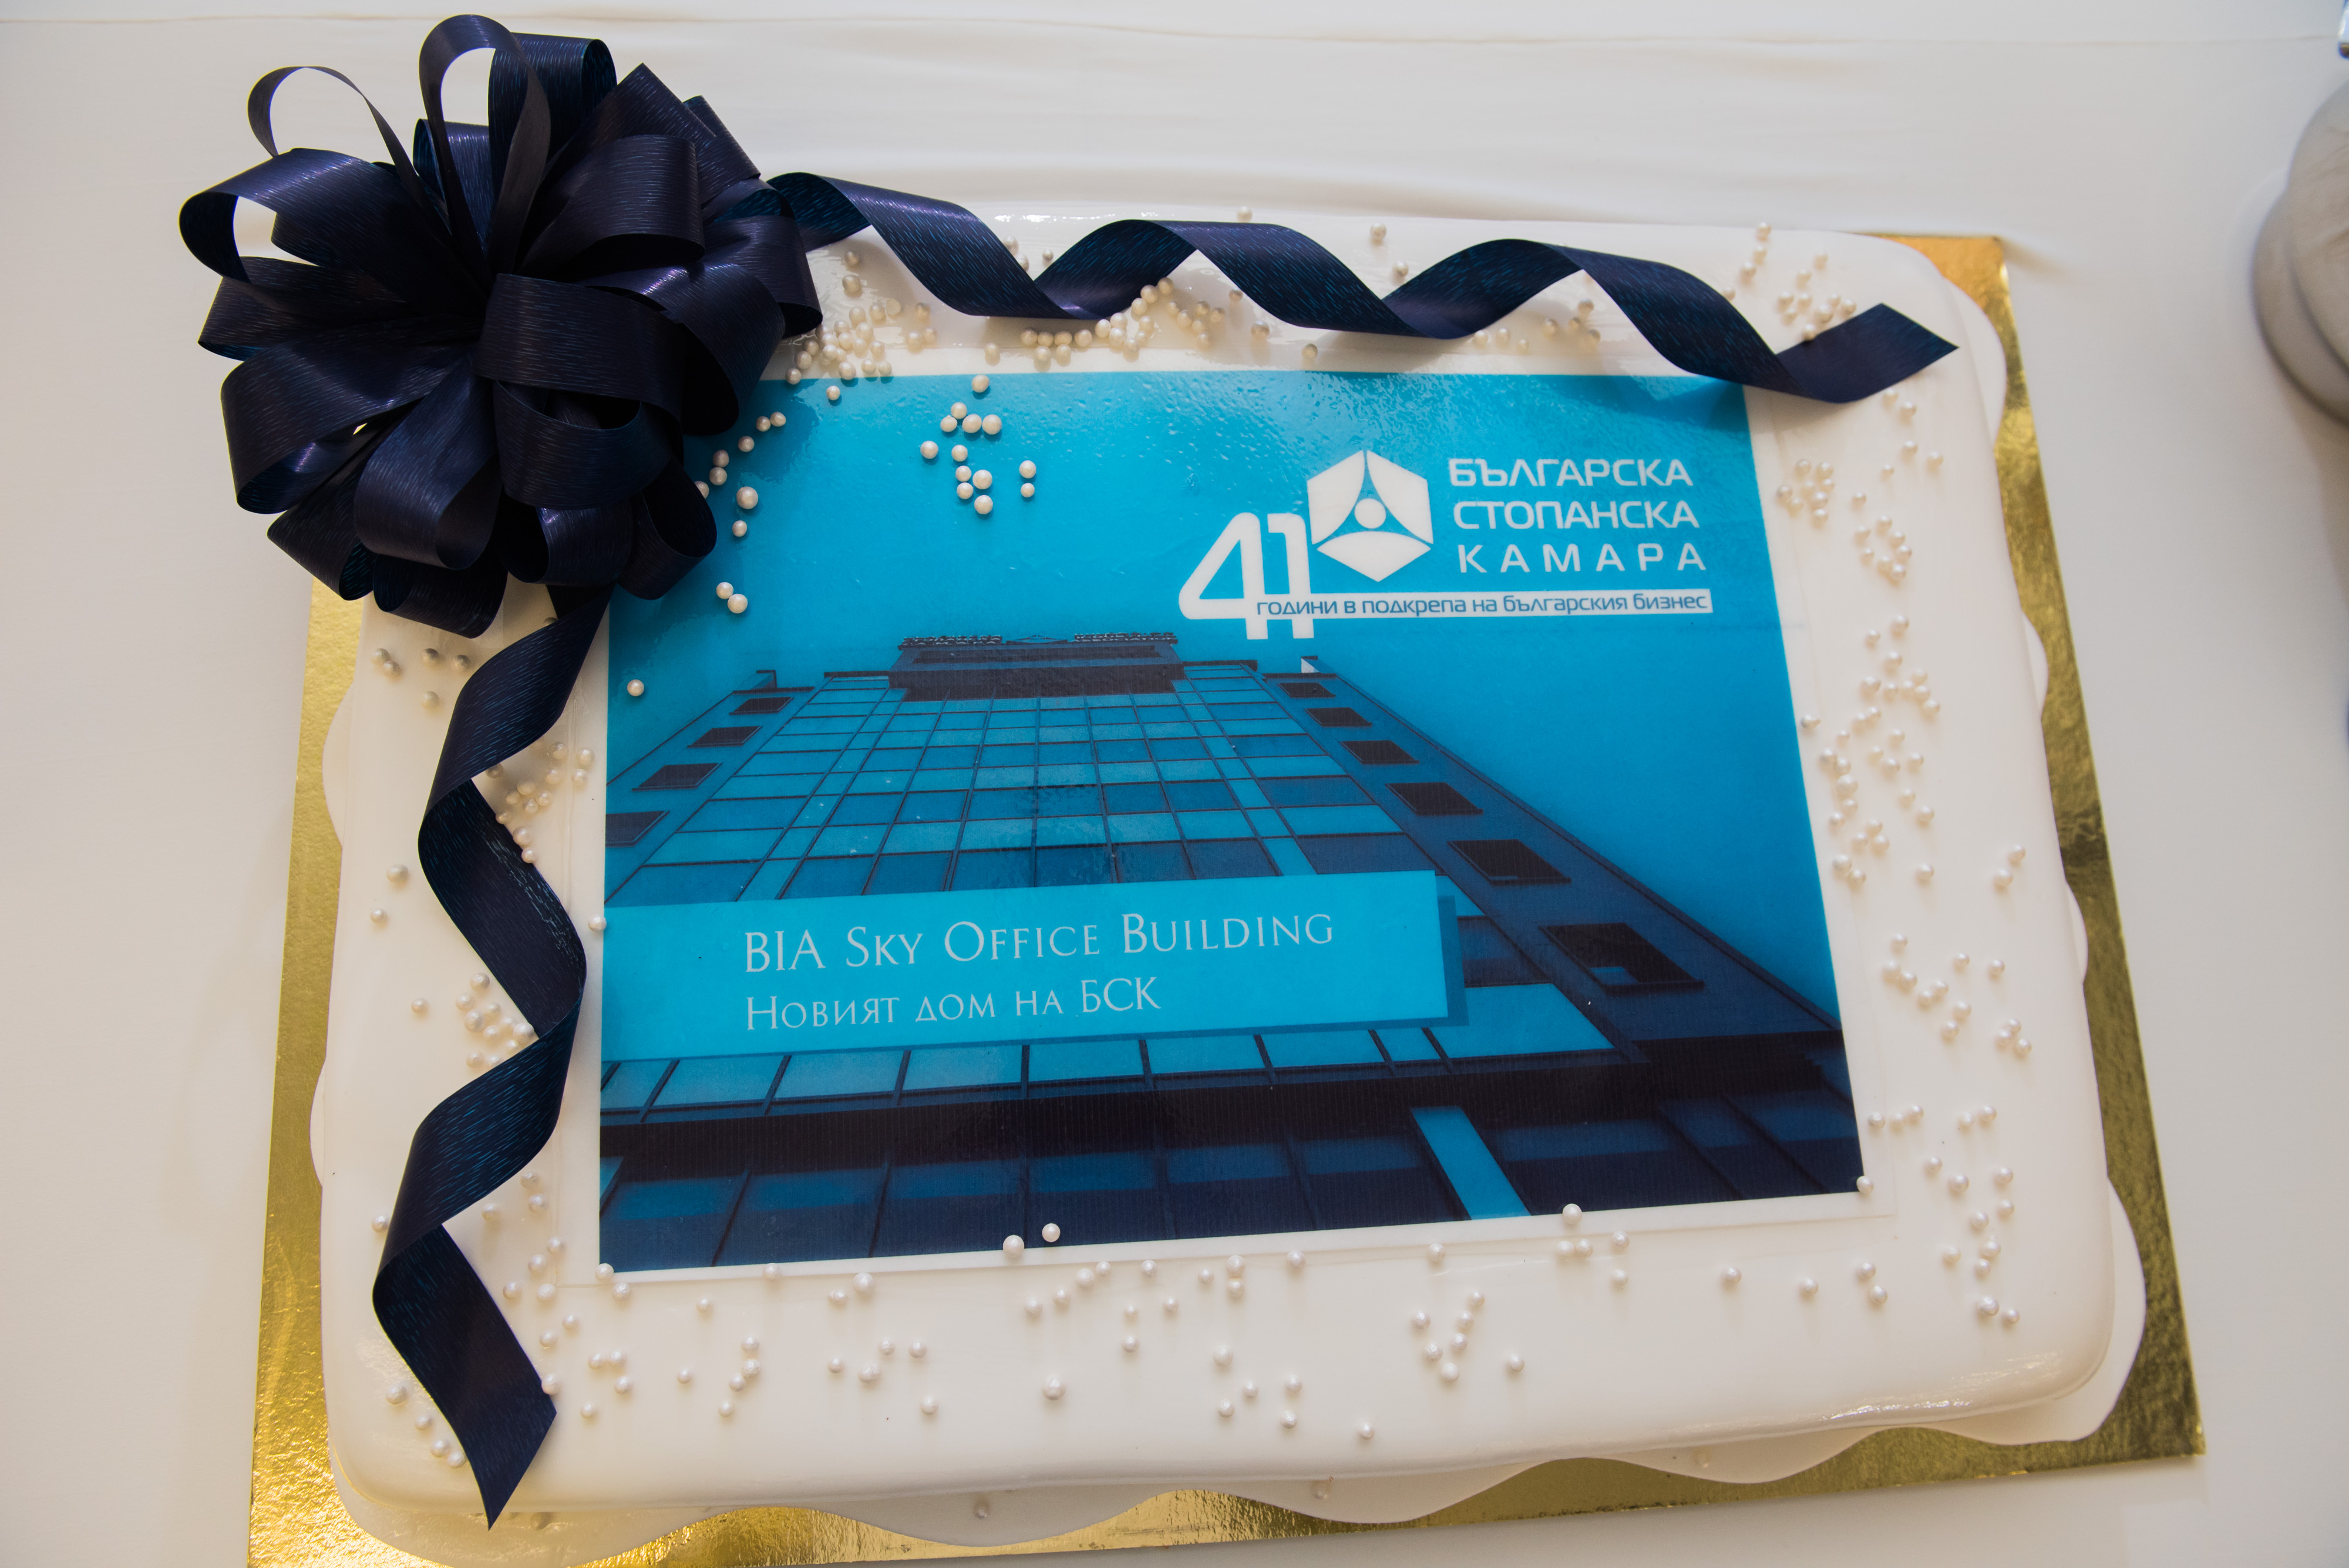 BIA anniversary in the brand new BIA SKY Building